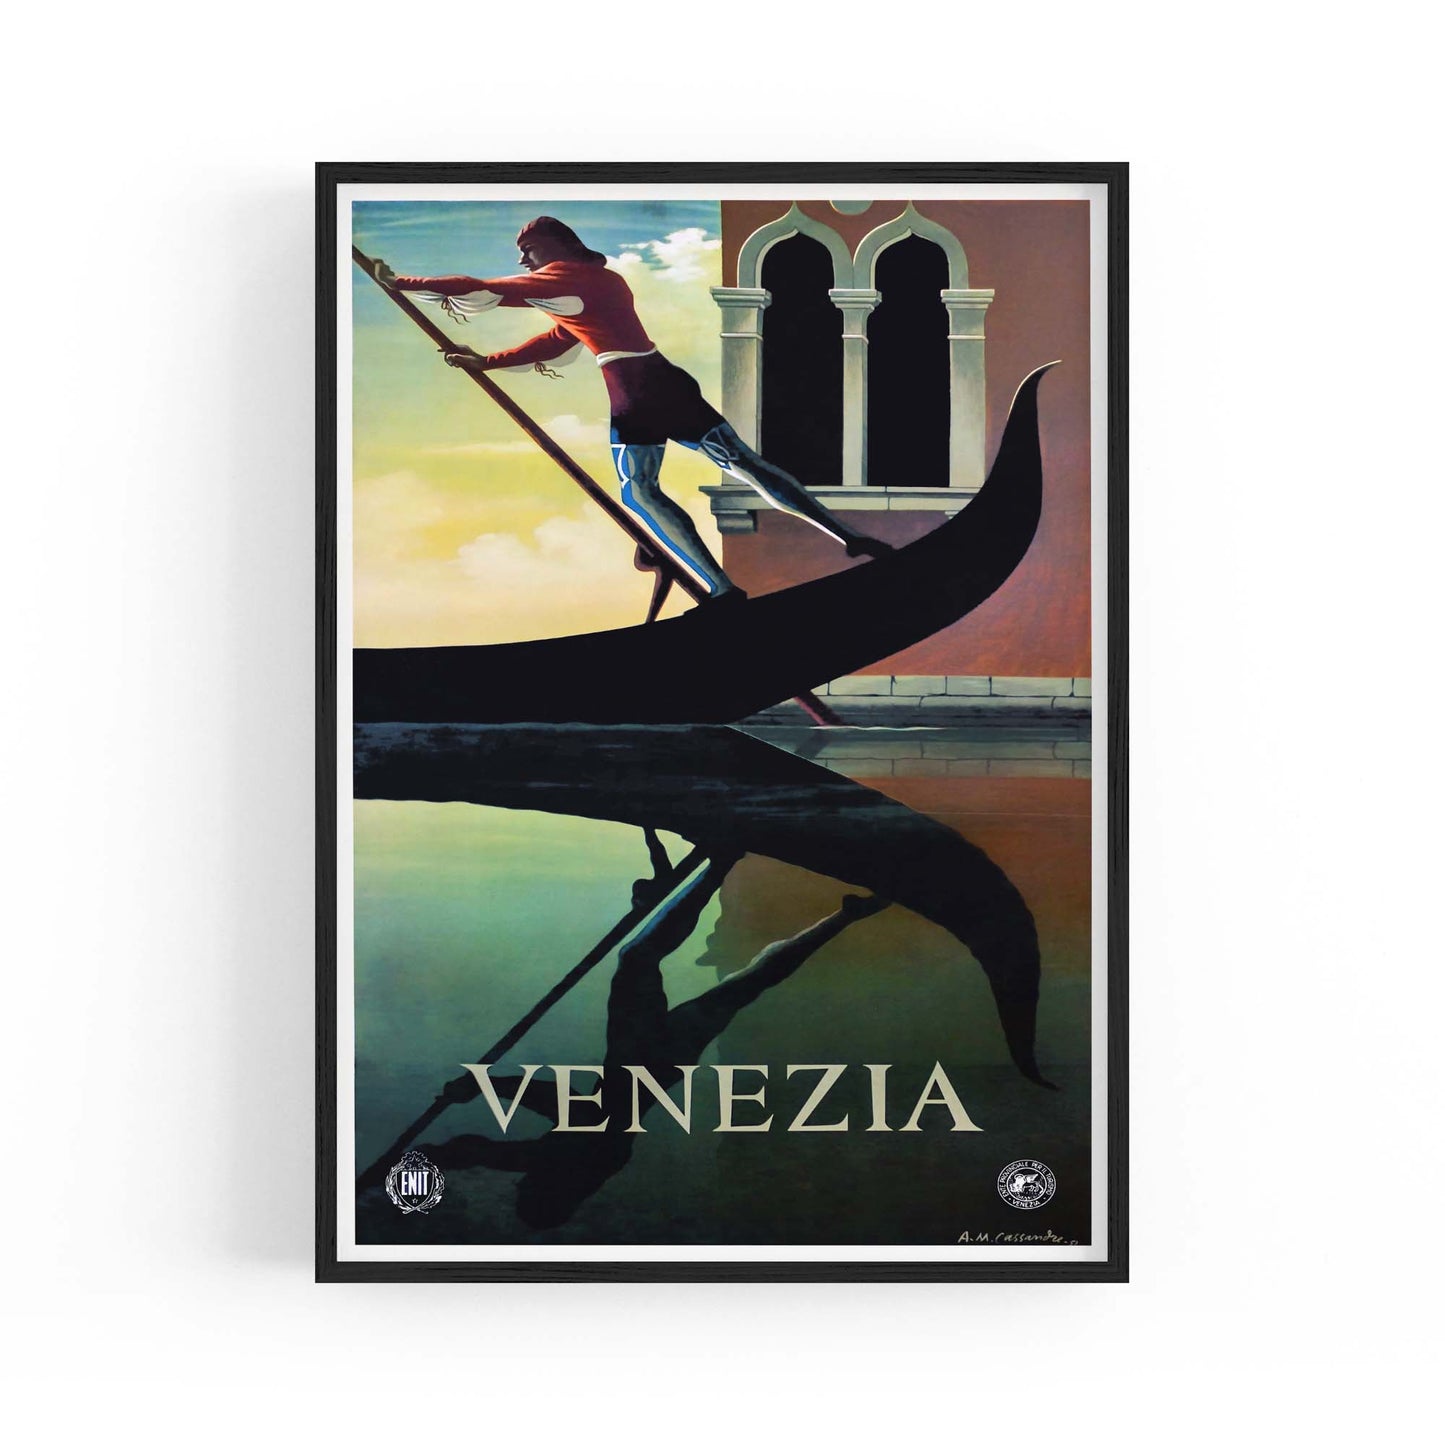 Venice Italy Vintage Travel Advert Wall Art - The Affordable Art Company